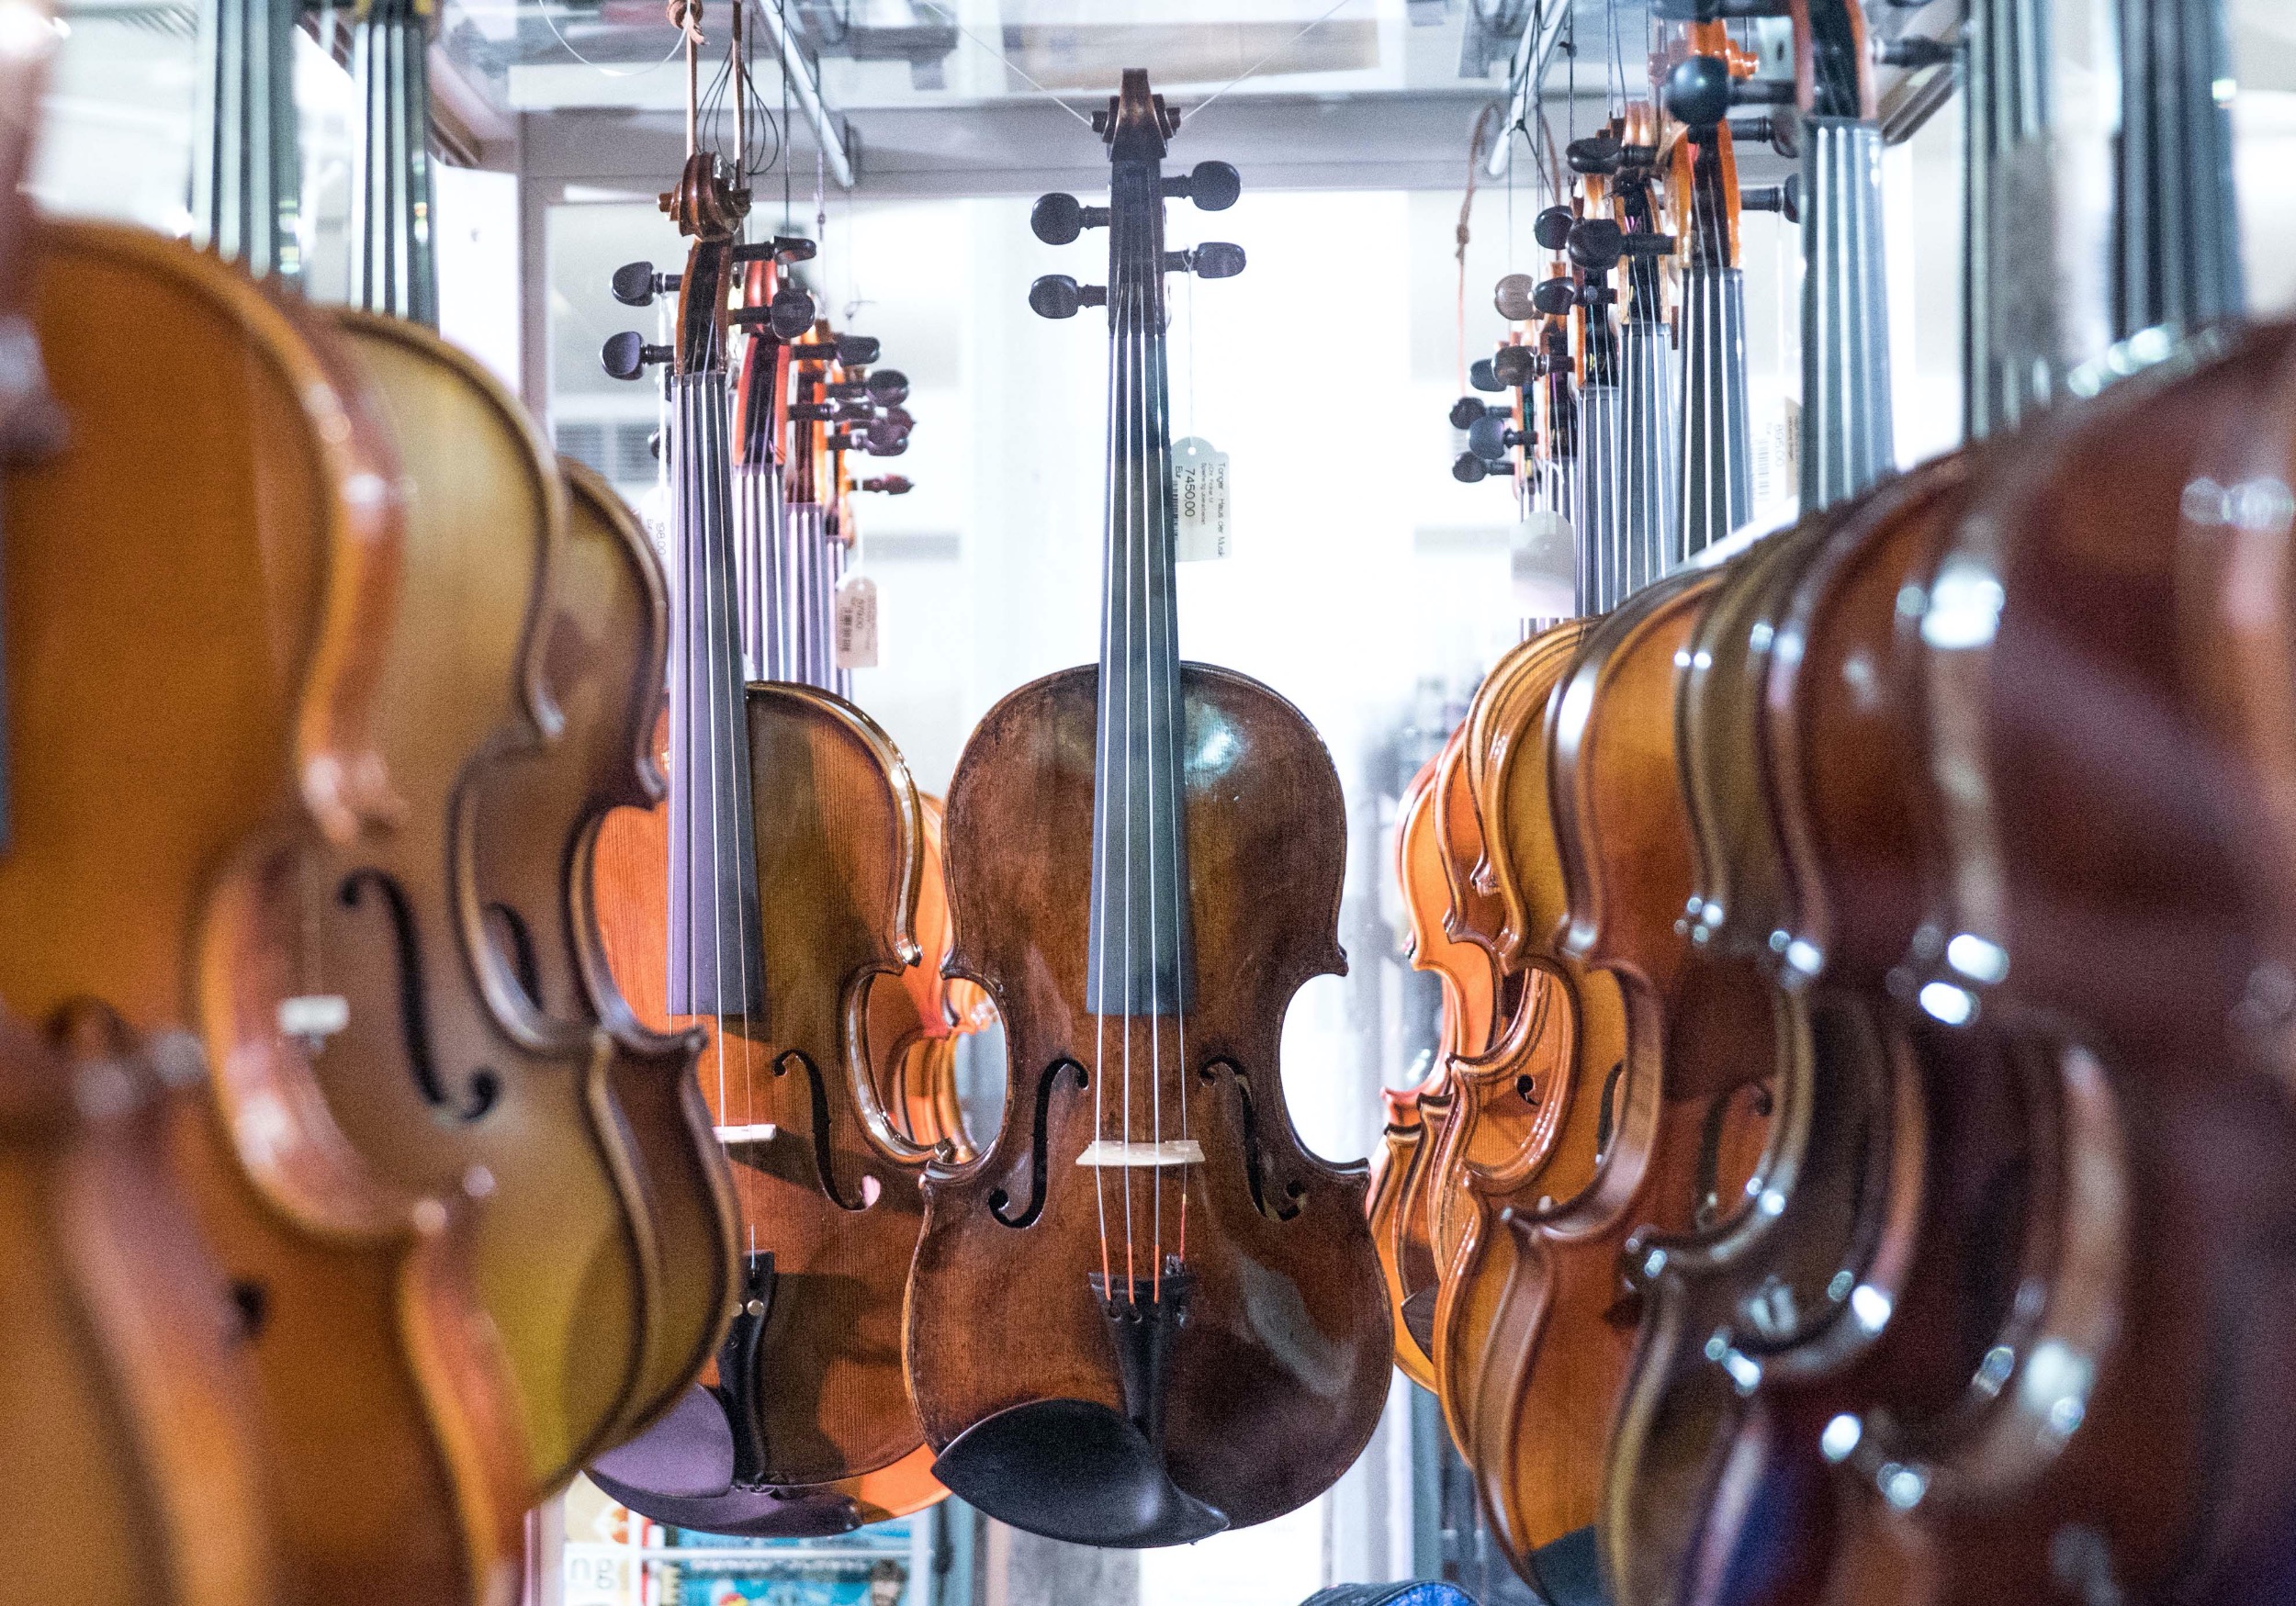 Rows of violins for sale